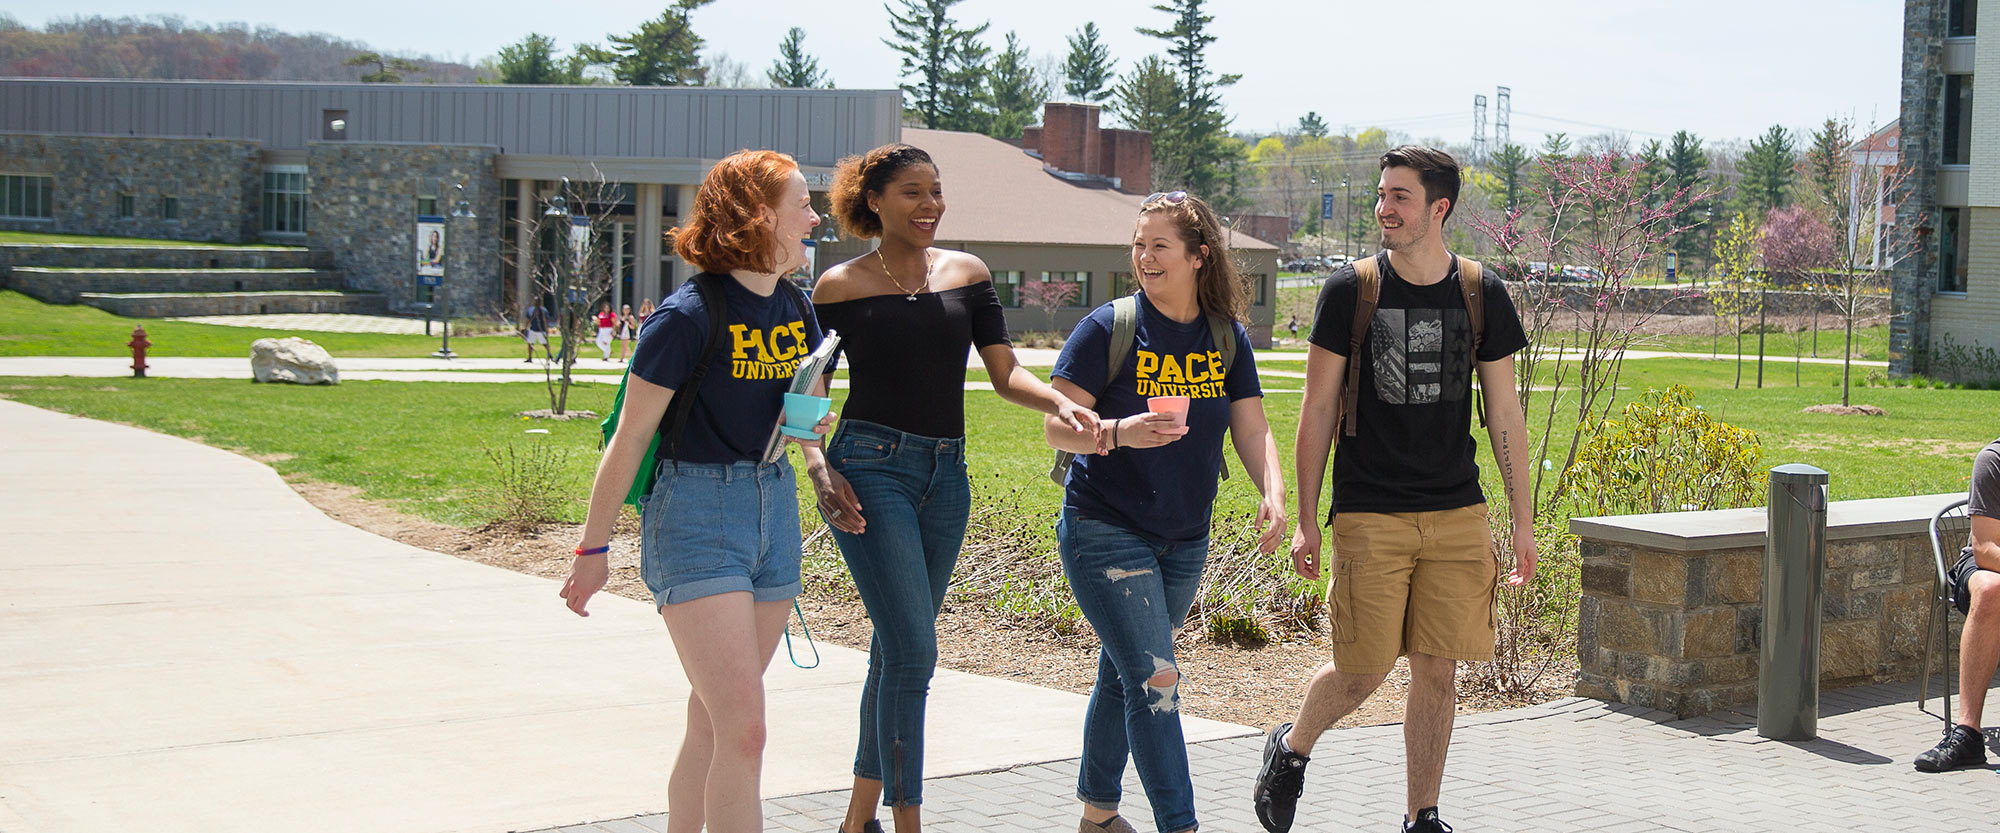 Pace Summer Programs Pace University New York